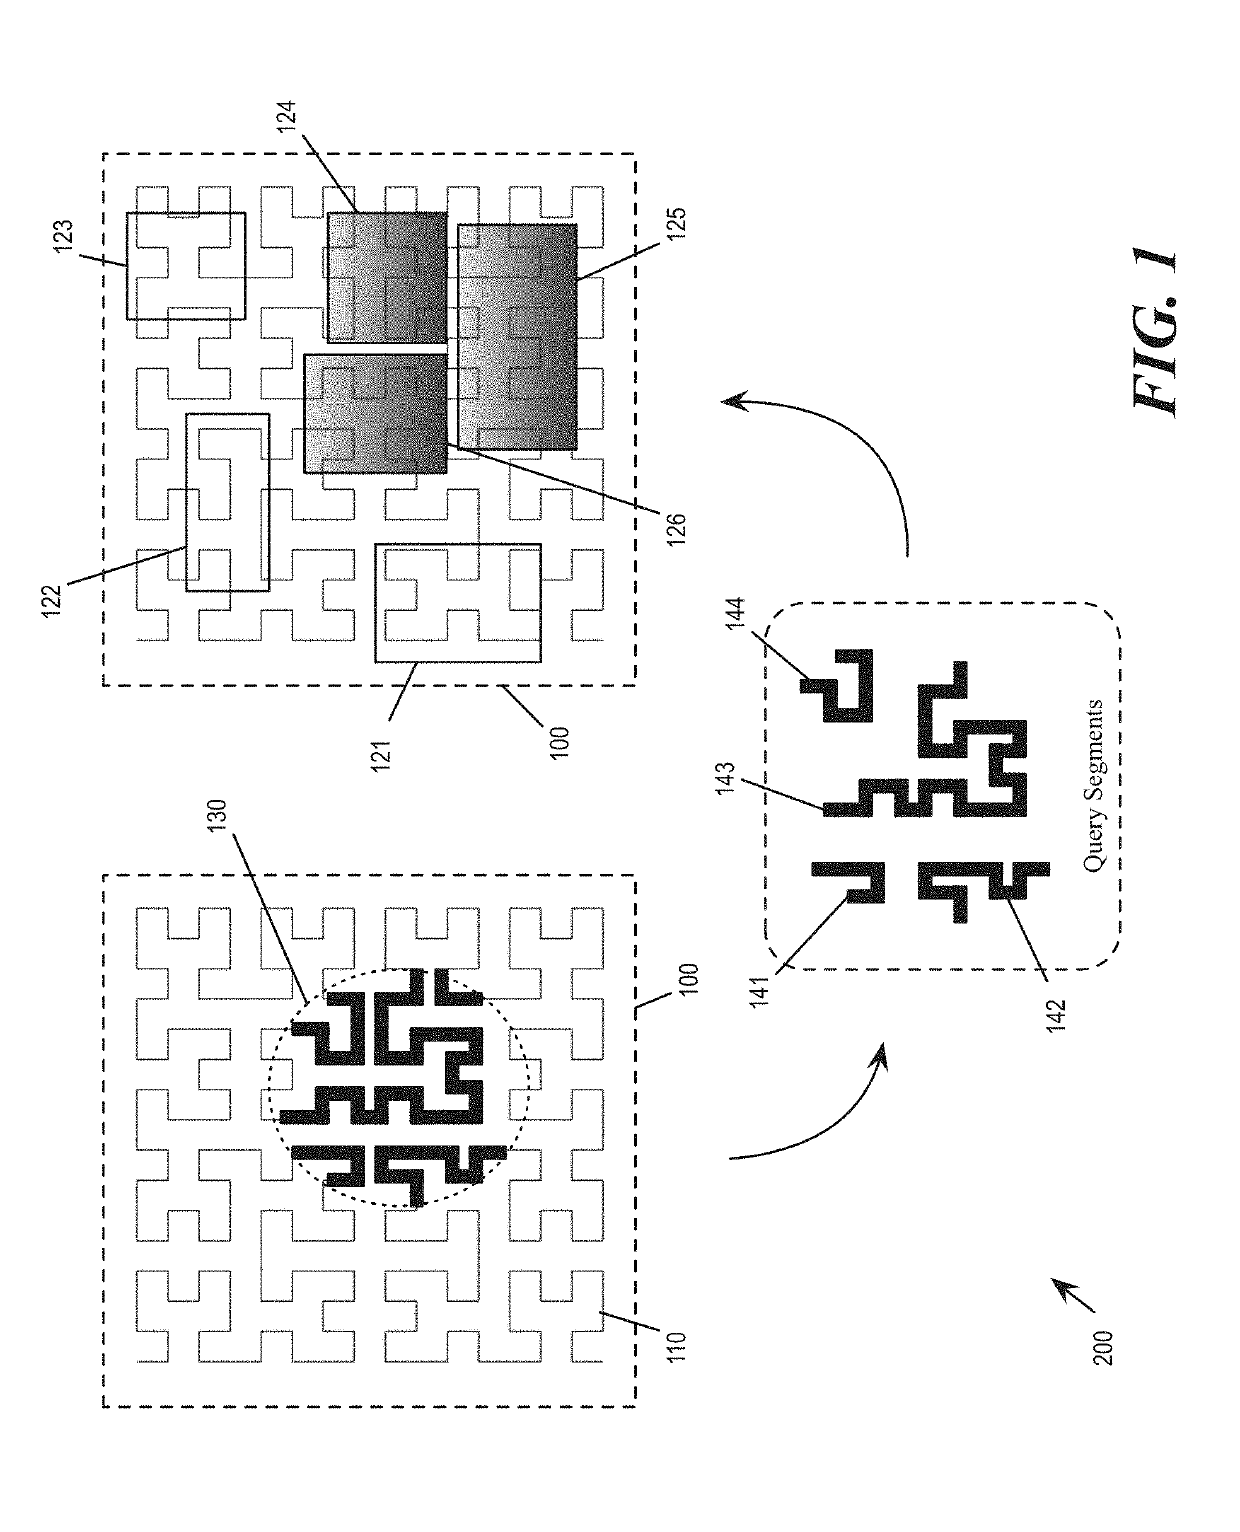 Spatial-Temporal Query for Cognitive IoT Contexts